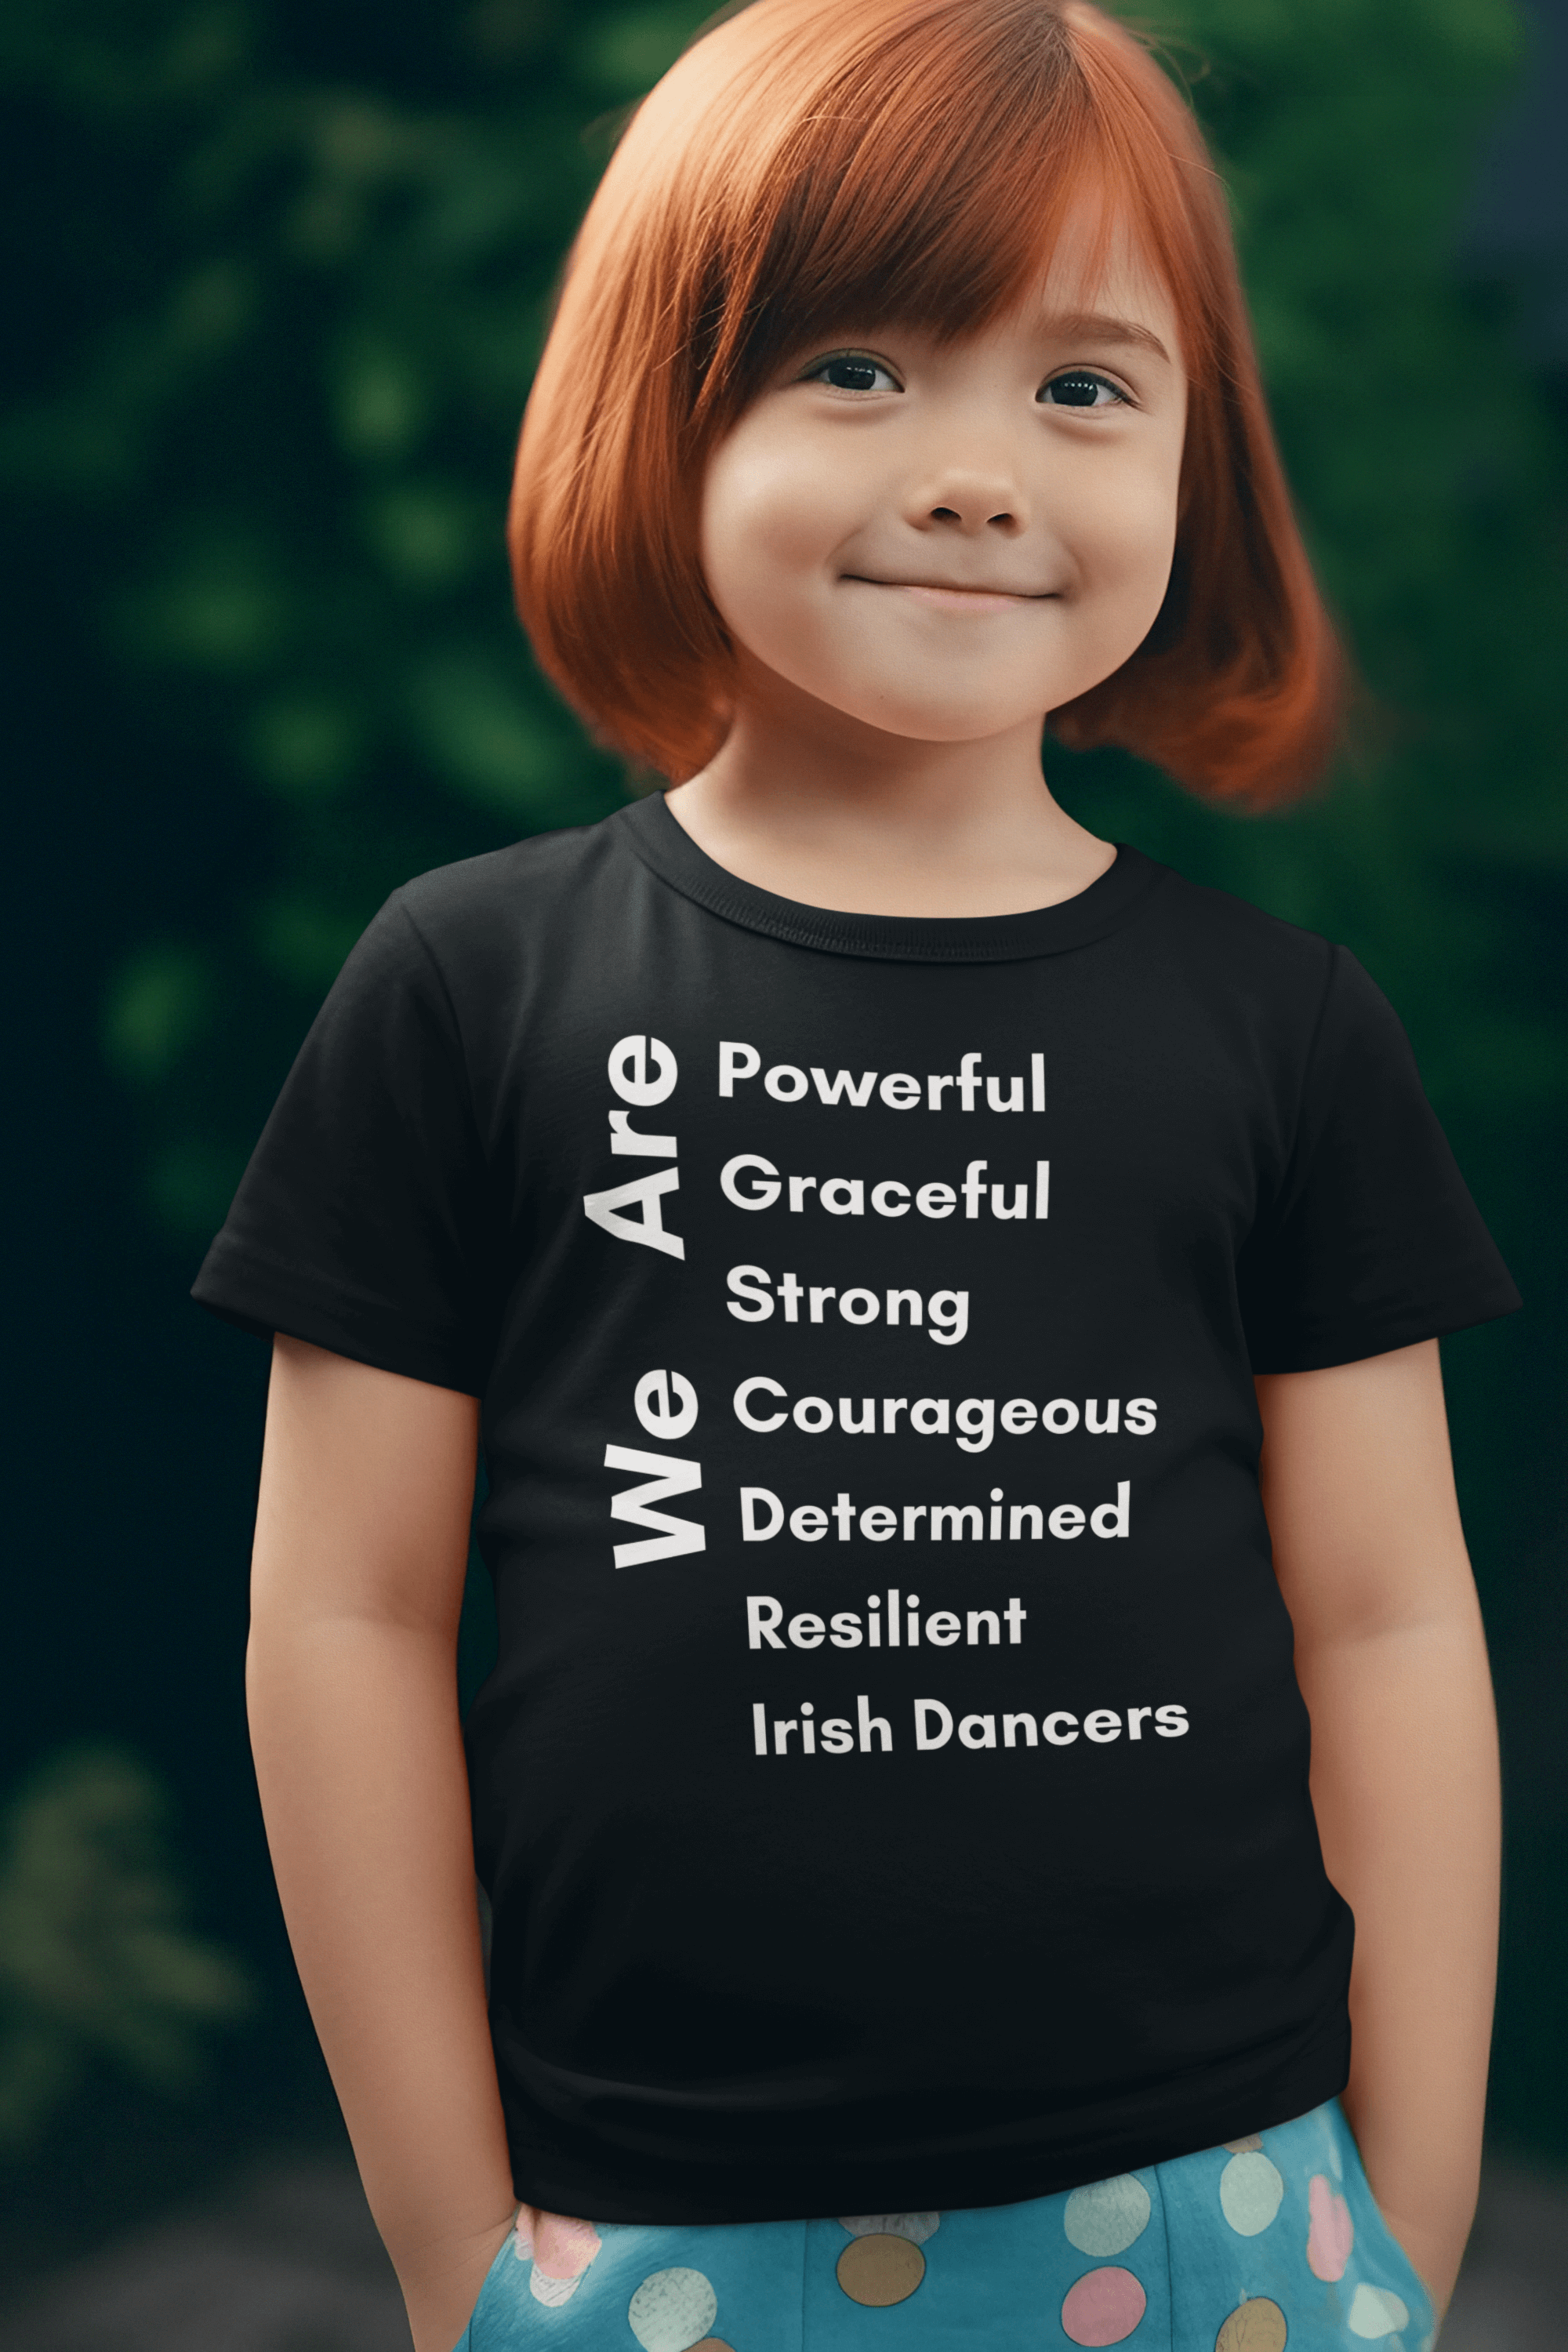 We Are Irish Dancers Youth Short Sleeve TeeKids will love this custom youth short sleeve tee. This lightweight side-seamed shirt maximizes comfort all day long. The ring-spun cotton makes this kids short sleeve tee perfect for displaying custom artwork. S